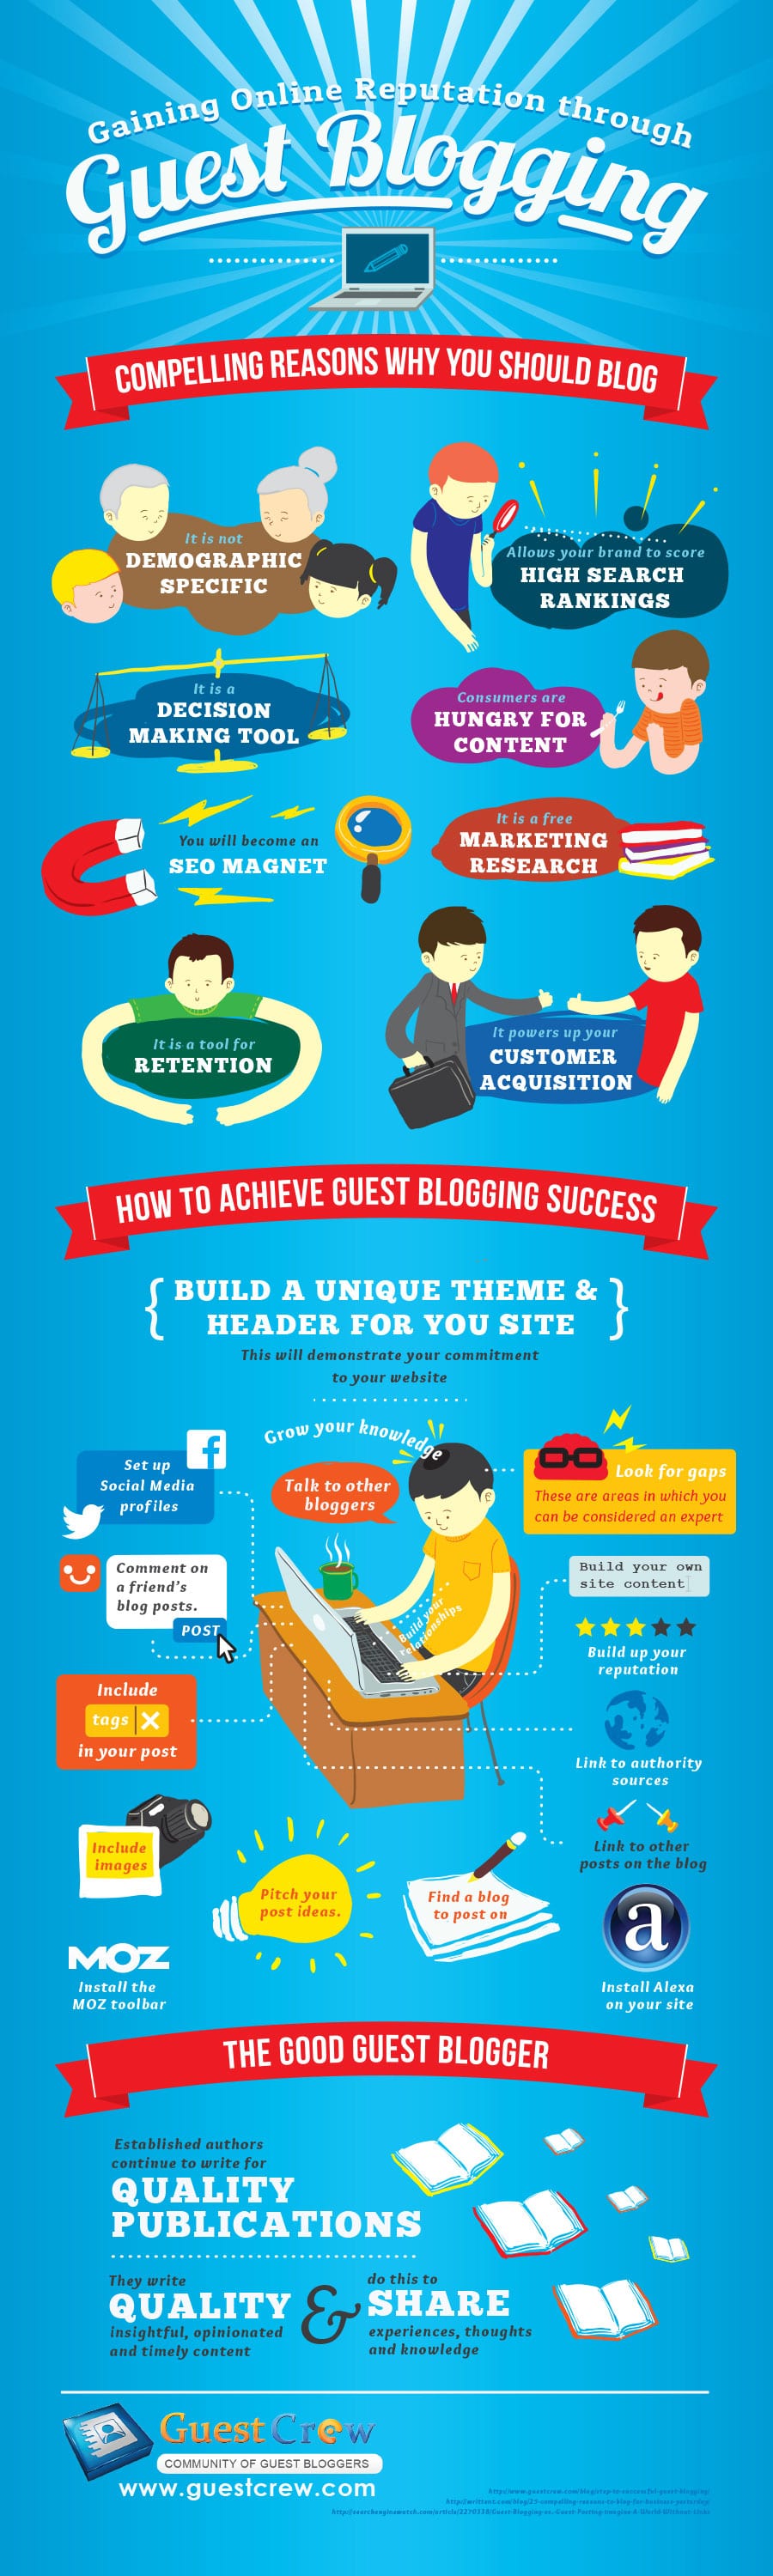 guest-blogging-online-influence-infographic